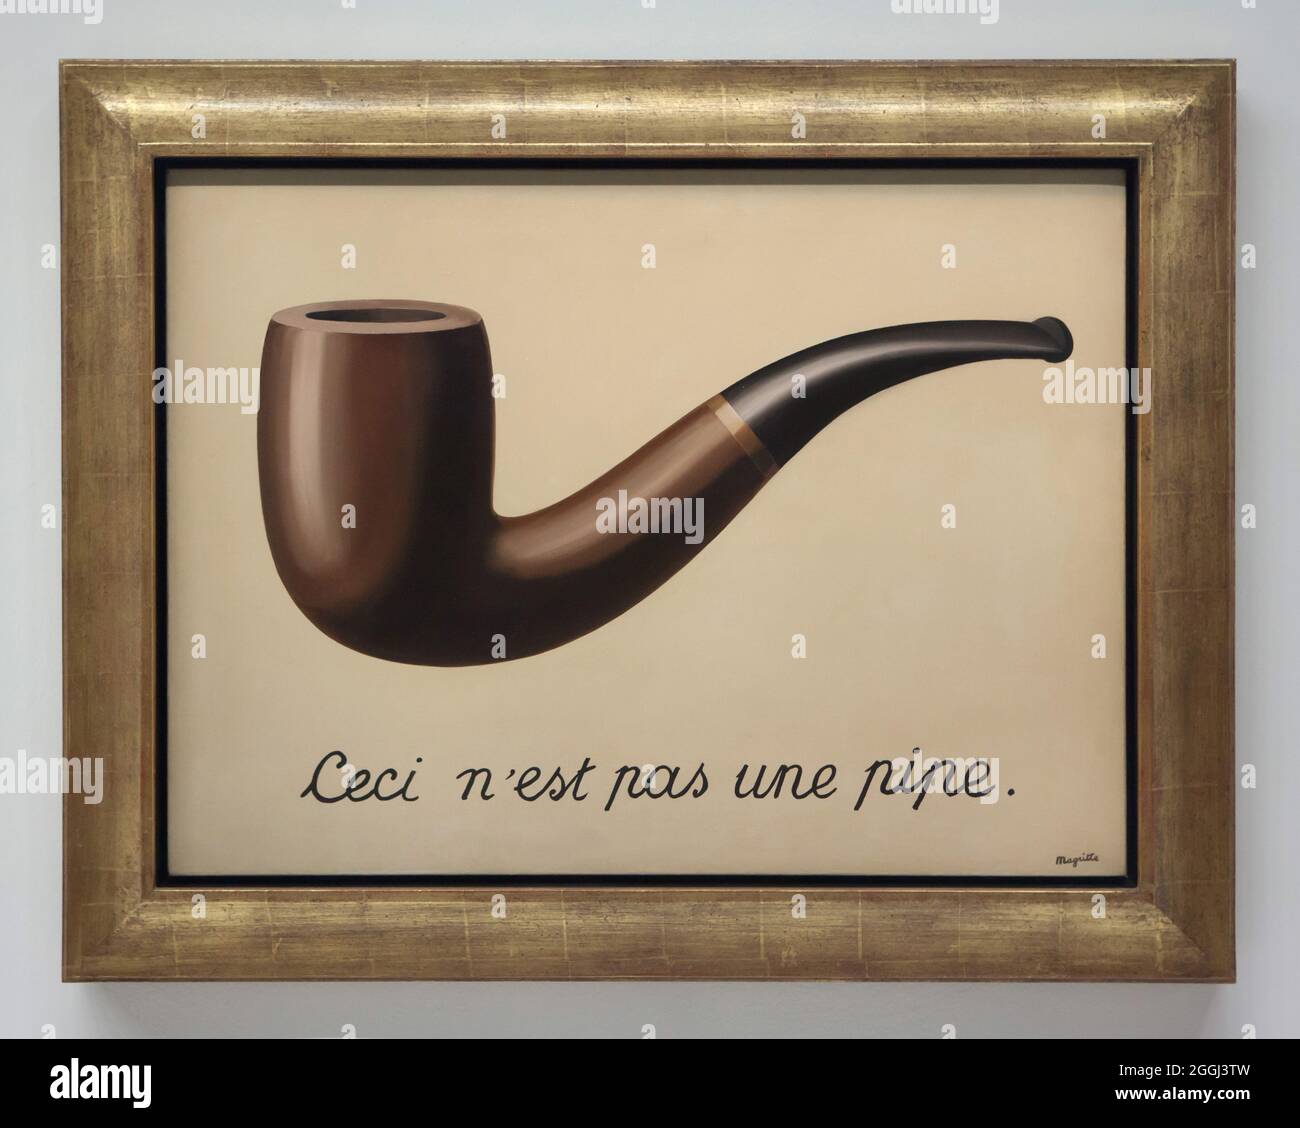 Painting 'La trahison des images' ('The Treachery of Images') by Belgian surrealist artist René Magritte (1929) on display at his retrospective exhibition in the Centre Pompidou in Paris, France. The French inscription 'Ceci n'est pas une pipe' means 'This is not a pipe'. The exhibition runs till 23 January 2017. After that the exhibition will be presented at the Schirn Kunsthalle in Frankfurt am Main, Germany, from 10 February to 5 June 2017. Stock Photo